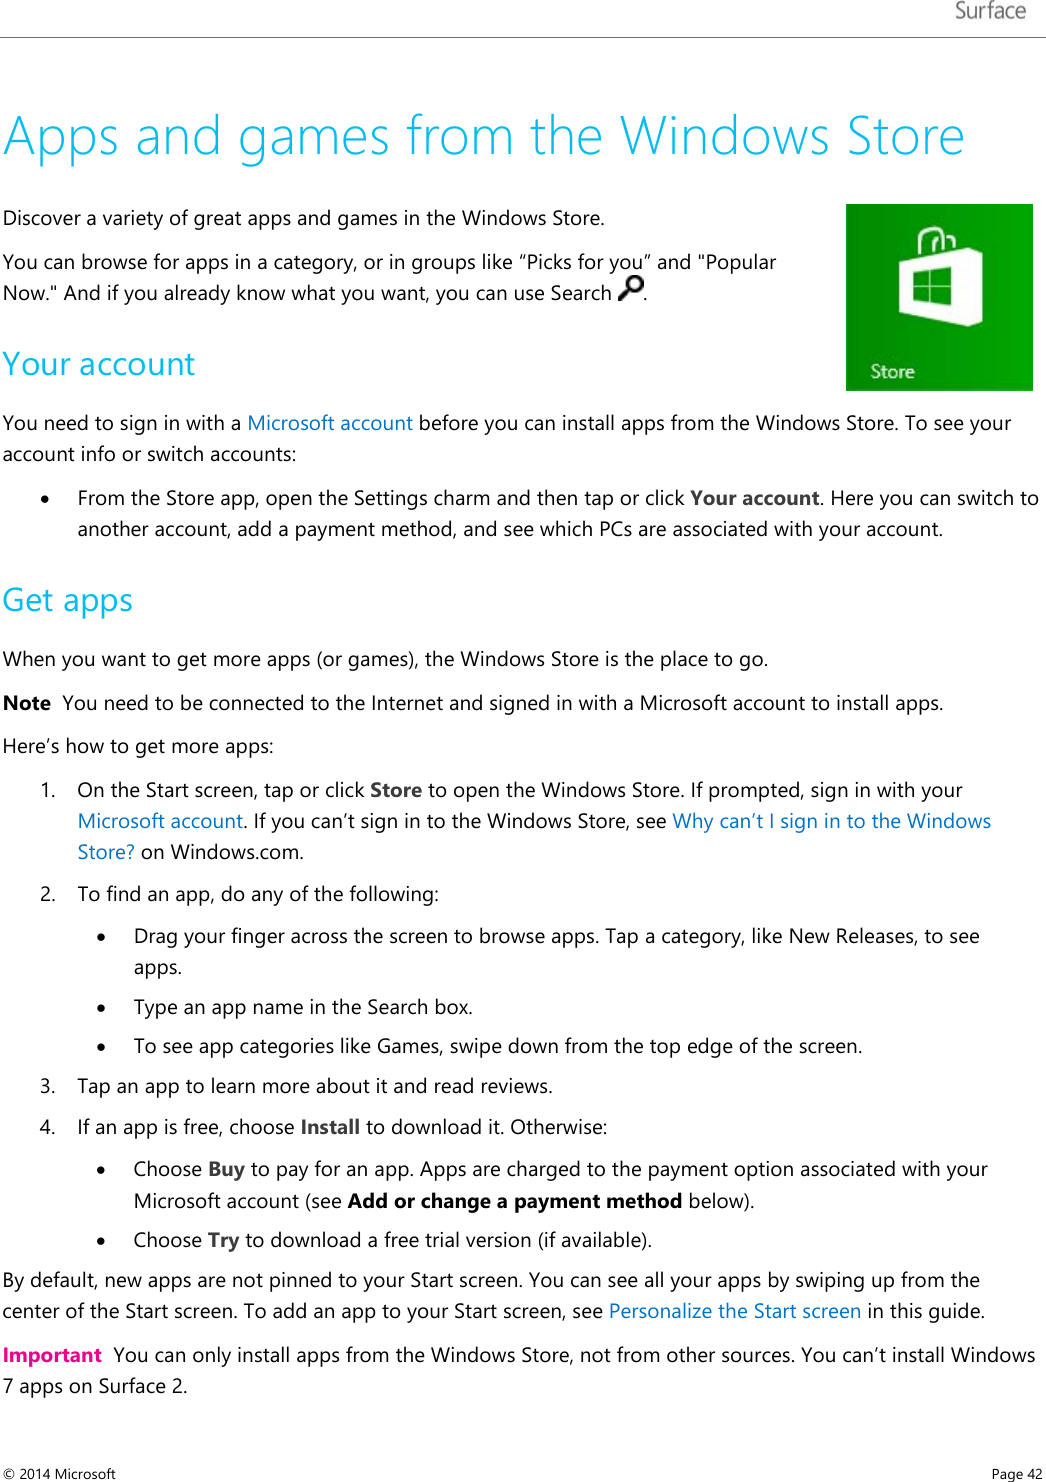   Apps and games from the Windows Store Discover a variety of great apps and games in the Windows Store.  You can browse for apps in a category, or in groups like “Picks for you” and &quot;Popular Now.&quot; And if you already know what you want, you can use Search  .  Your account You need to sign in with a Microsoft account before you can install apps from the Windows Store. To see your account info or switch accounts: • From the Store app, open the Settings charm and then tap or click Your account. Here you can switch to another account, add a payment method, and see which PCs are associated with your account.  Get apps  When you want to get more apps (or games), the Windows Store is the place to go.  Note  You need to be connected to the Internet and signed in with a Microsoft account to install apps. Here’s how to get more apps: 1. On the Start screen, tap or click Store to open the Windows Store. If prompted, sign in with your Microsoft account. If you can’t sign in to the Windows Store, see Why can’t I sign in to the Windows Store? on Windows.com. 2. To find an app, do any of the following:  • Drag your finger across the screen to browse apps. Tap a category, like New Releases, to see apps. • Type an app name in the Search box. • To see app categories like Games, swipe down from the top edge of the screen. 3. Tap an app to learn more about it and read reviews.  4. If an app is free, choose Install to download it. Otherwise:  • Choose Buy to pay for an app. Apps are charged to the payment option associated with your Microsoft account (see Add or change a payment method below). • Choose Try to download a free trial version (if available). By default, new apps are not pinned to your Start screen. You can see all your apps by swiping up from the center of the Start screen. To add an app to your Start screen, see Personalize the Start screen in this guide. Important  You can only install apps from the Windows Store, not from other sources. You can’t install Windows 7 apps on Surface 2.  © 2014 Microsoft     Page 42  